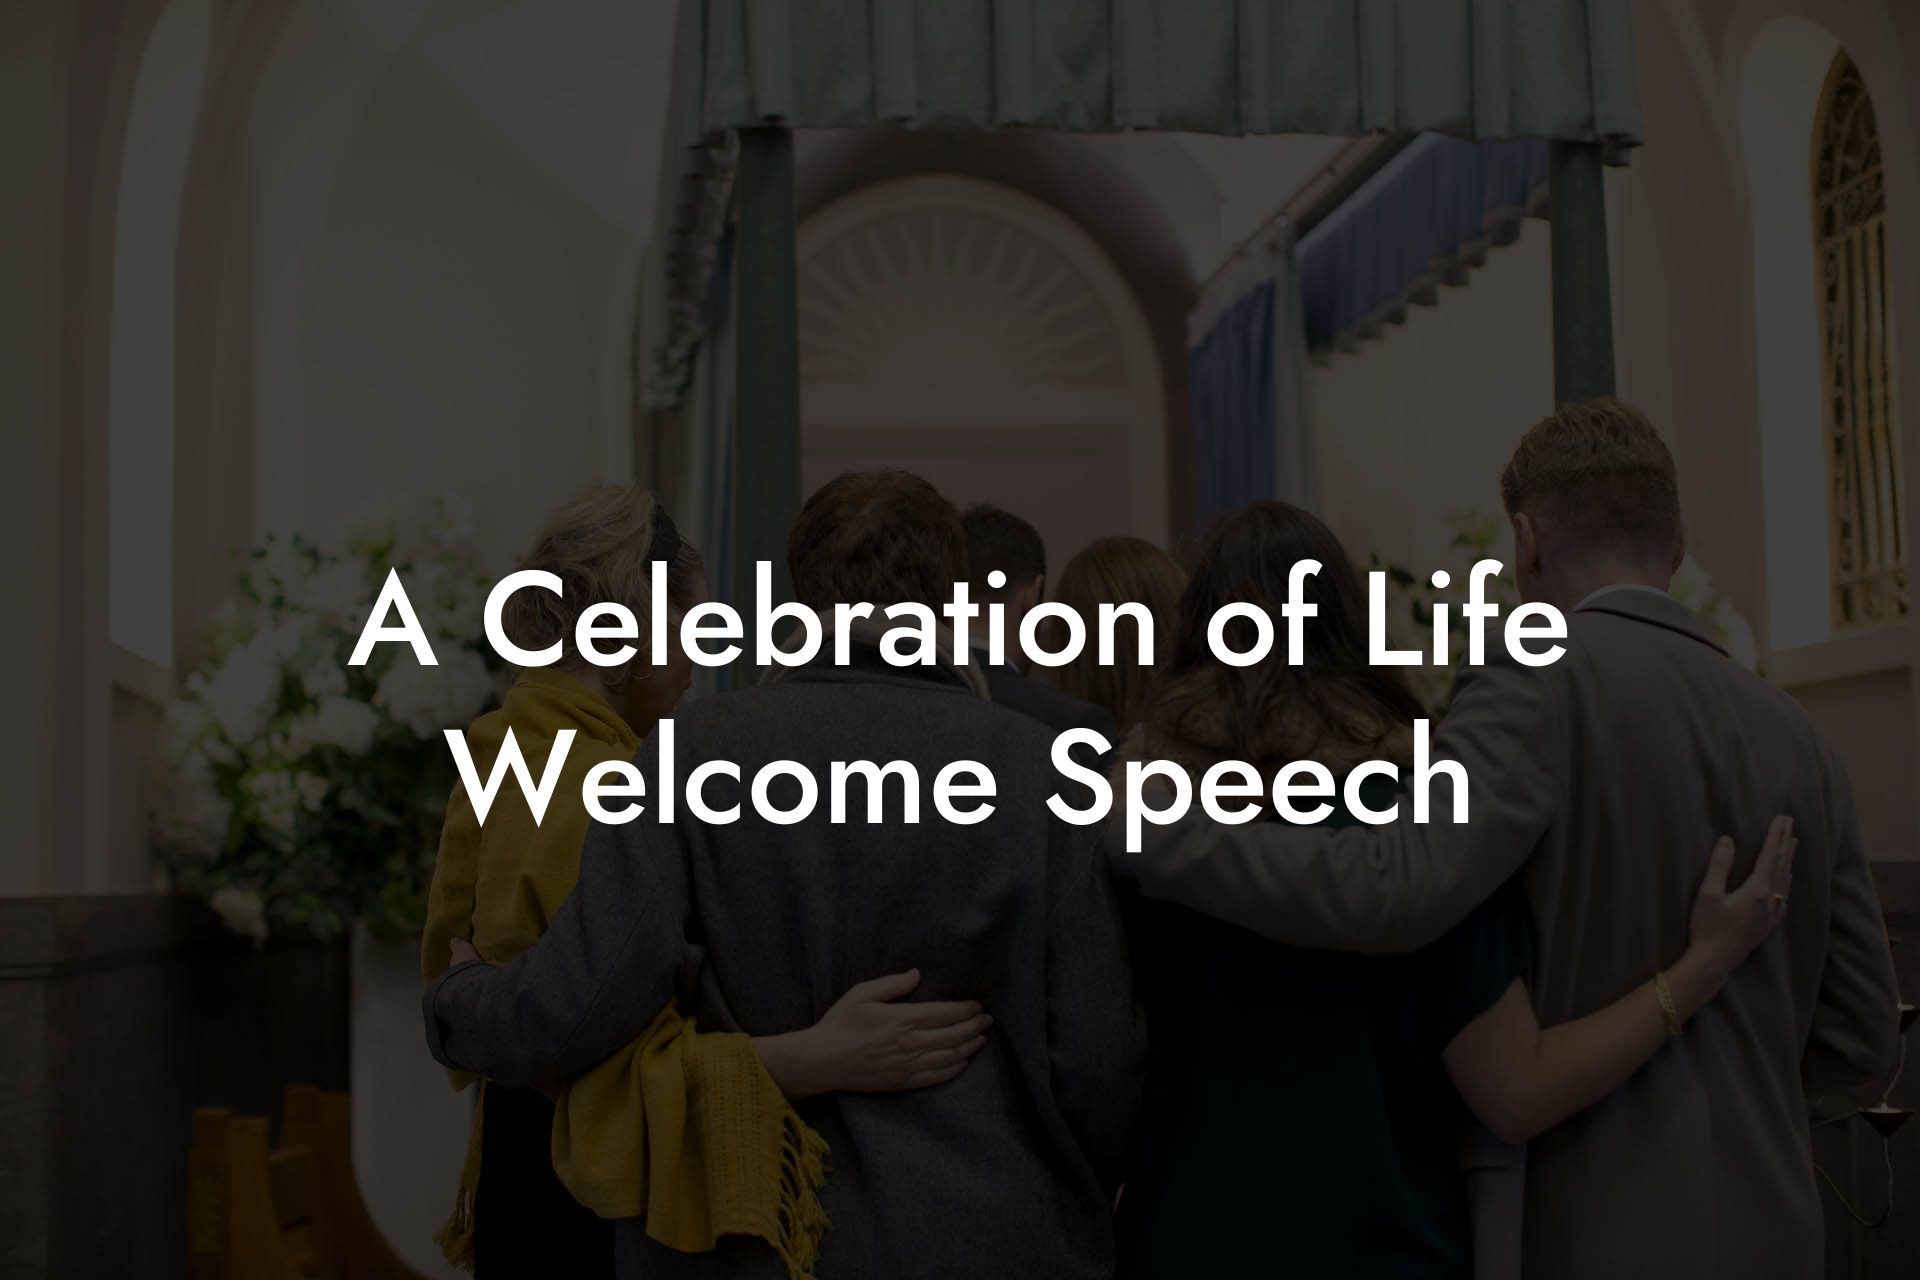 A Celebration of Life Welcome Speech